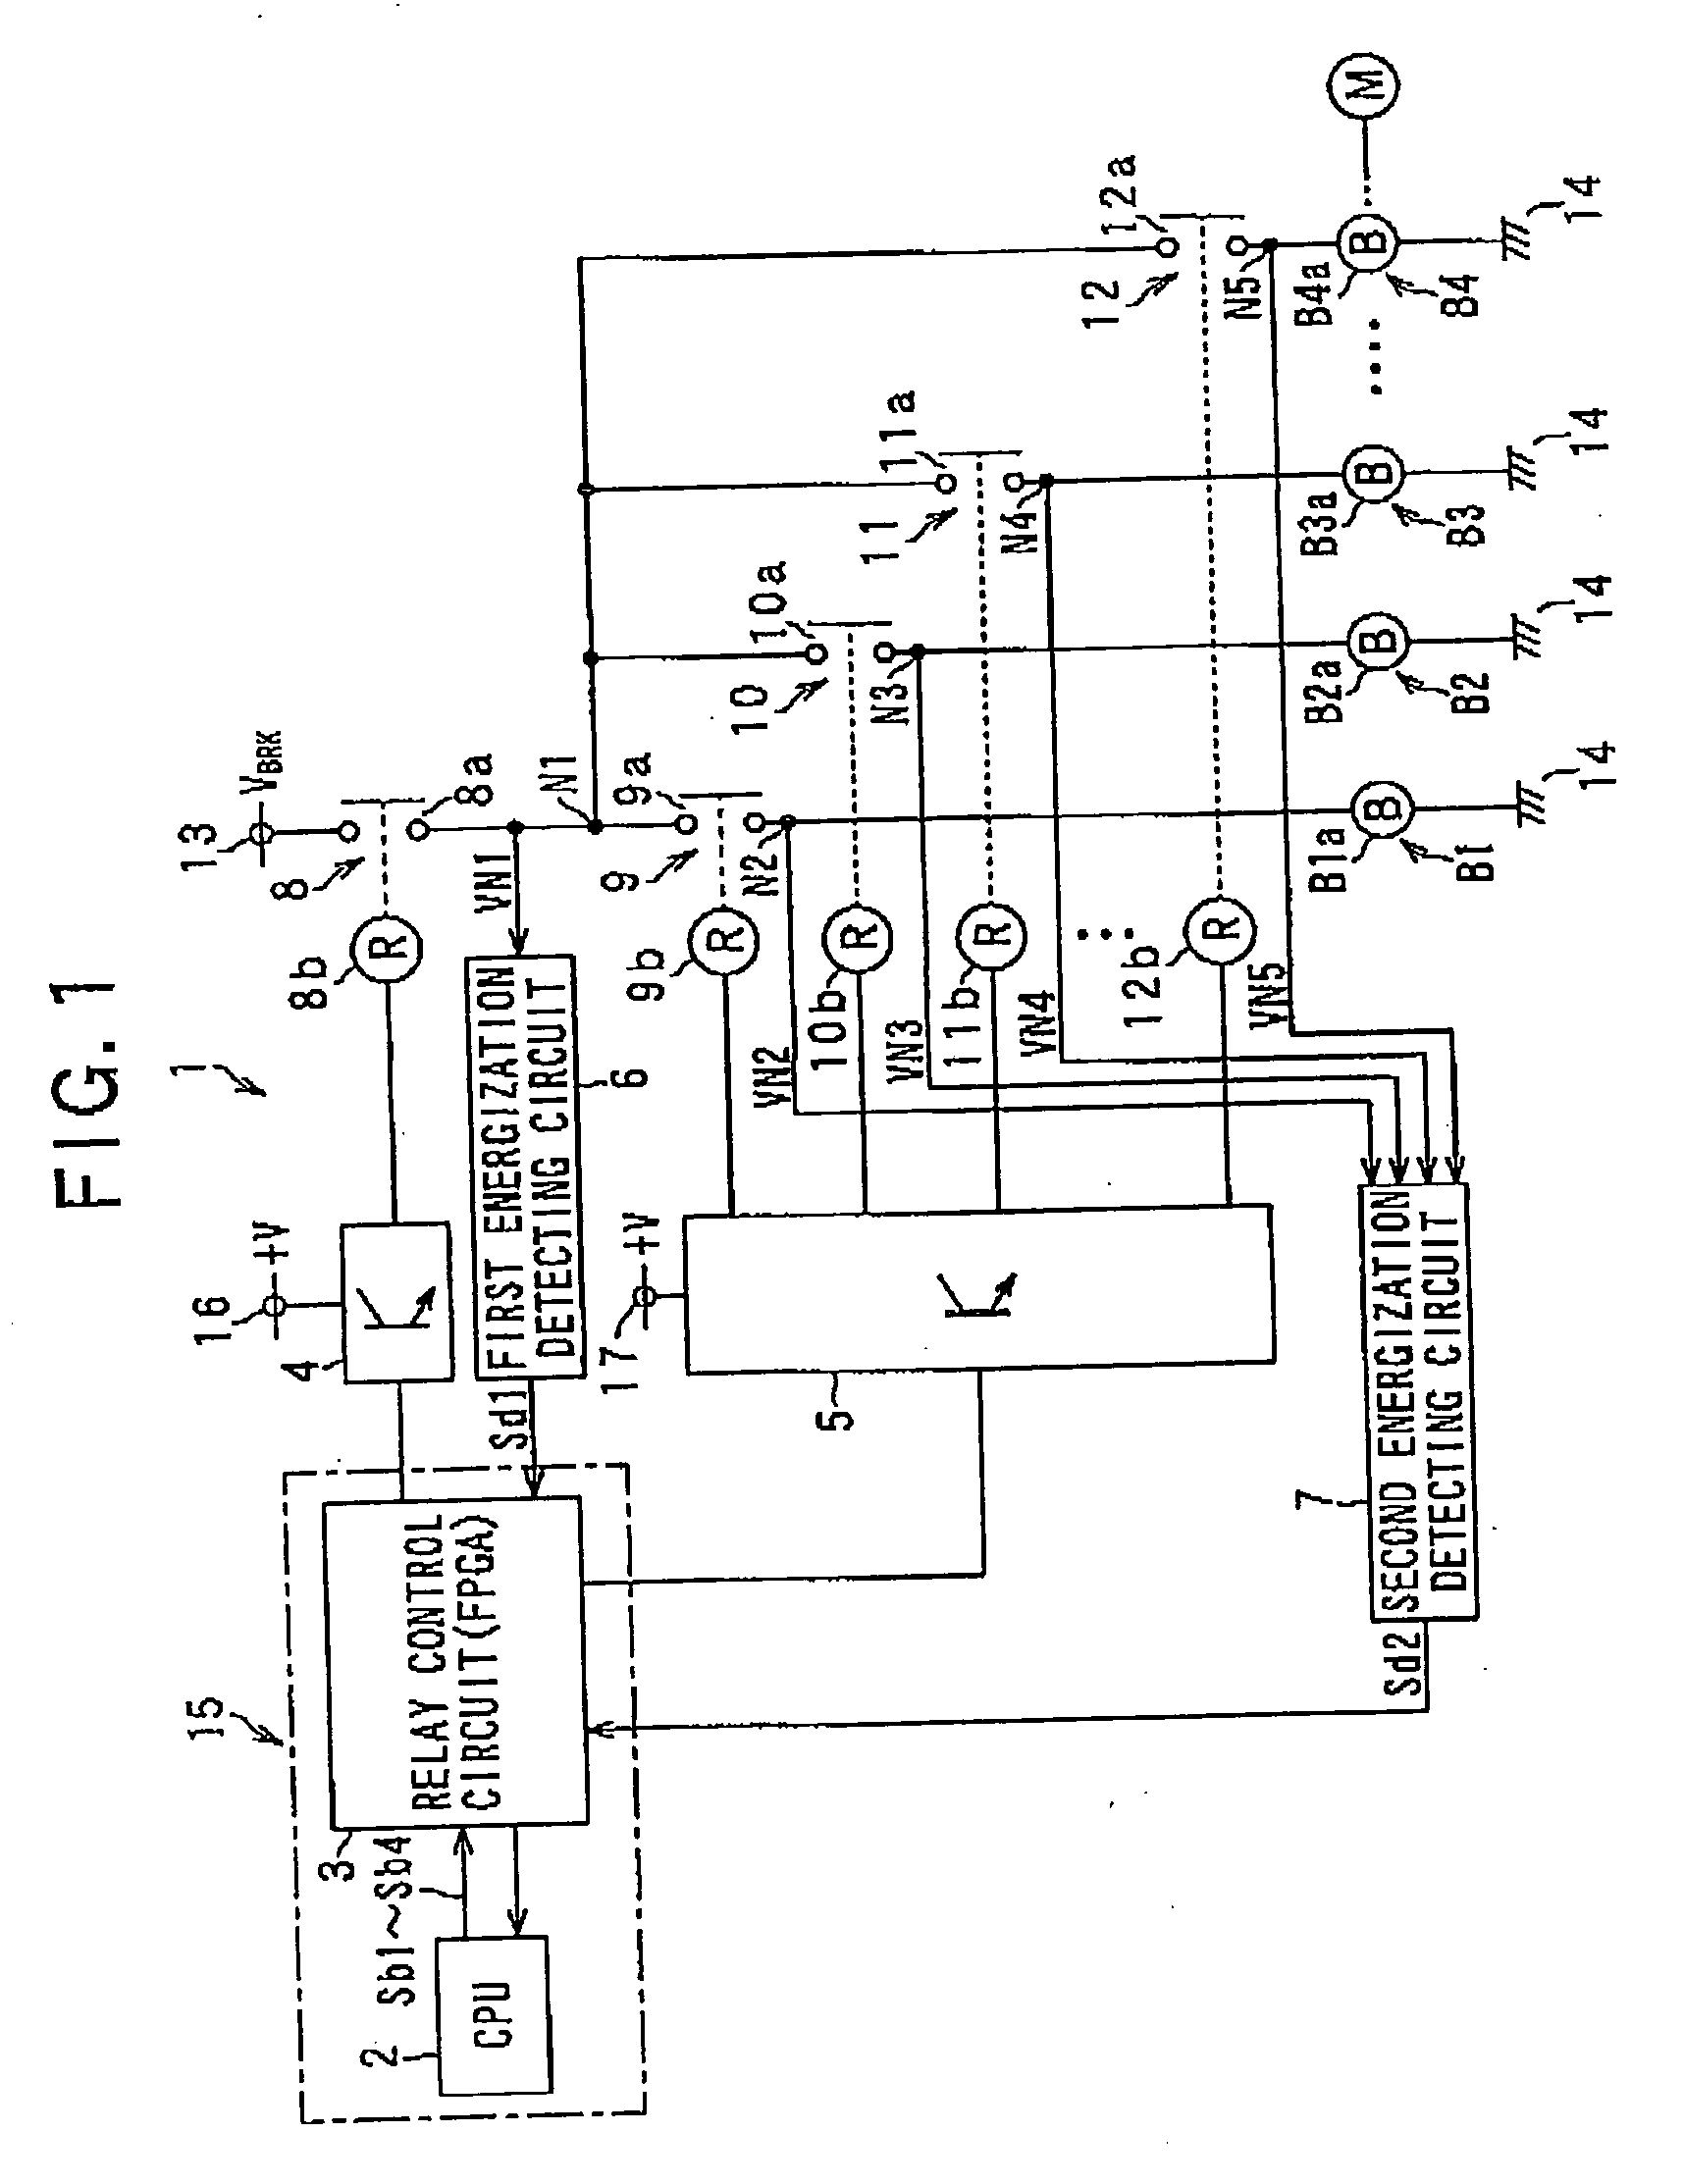 Apparatus for detecting malfunctions of electromagnetic brakes of robot